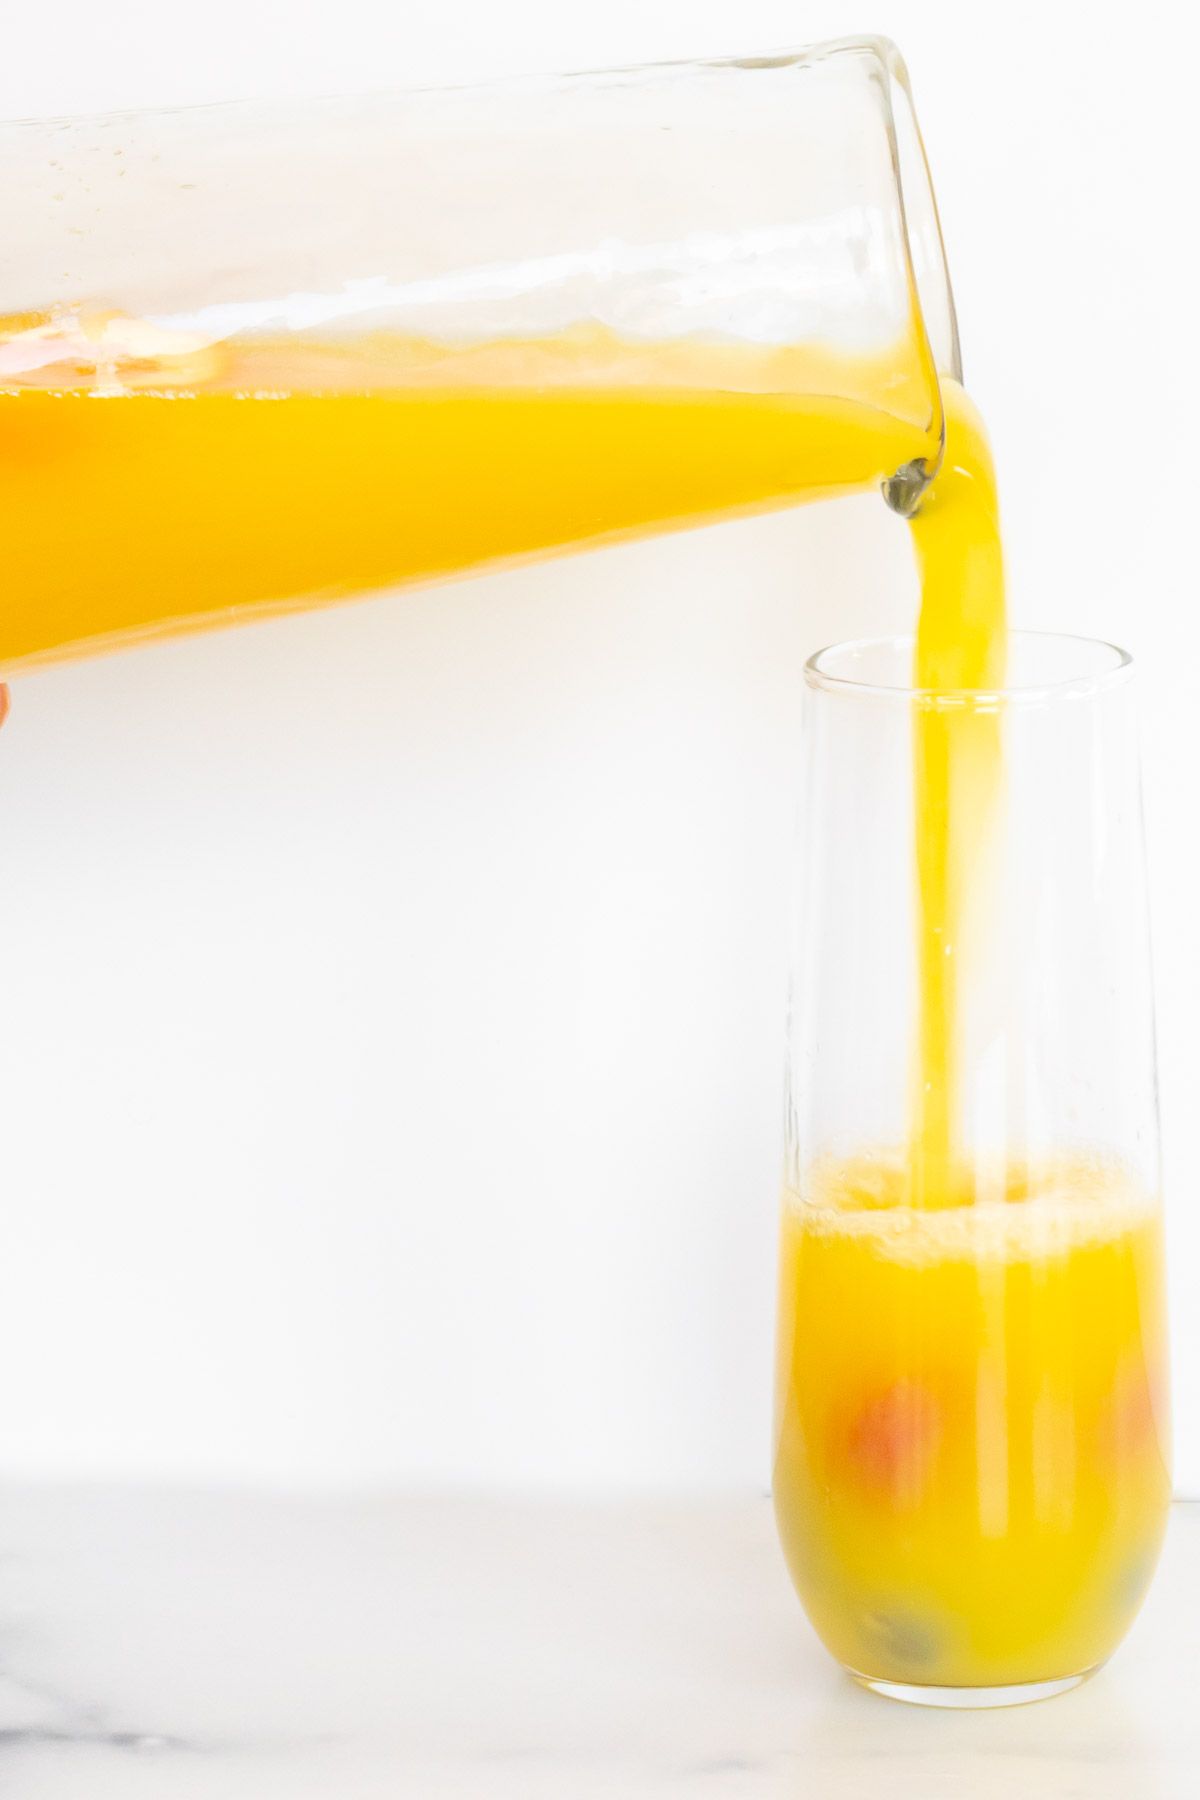 Bottomless mimosa pitcher pouring into a glass with fruit